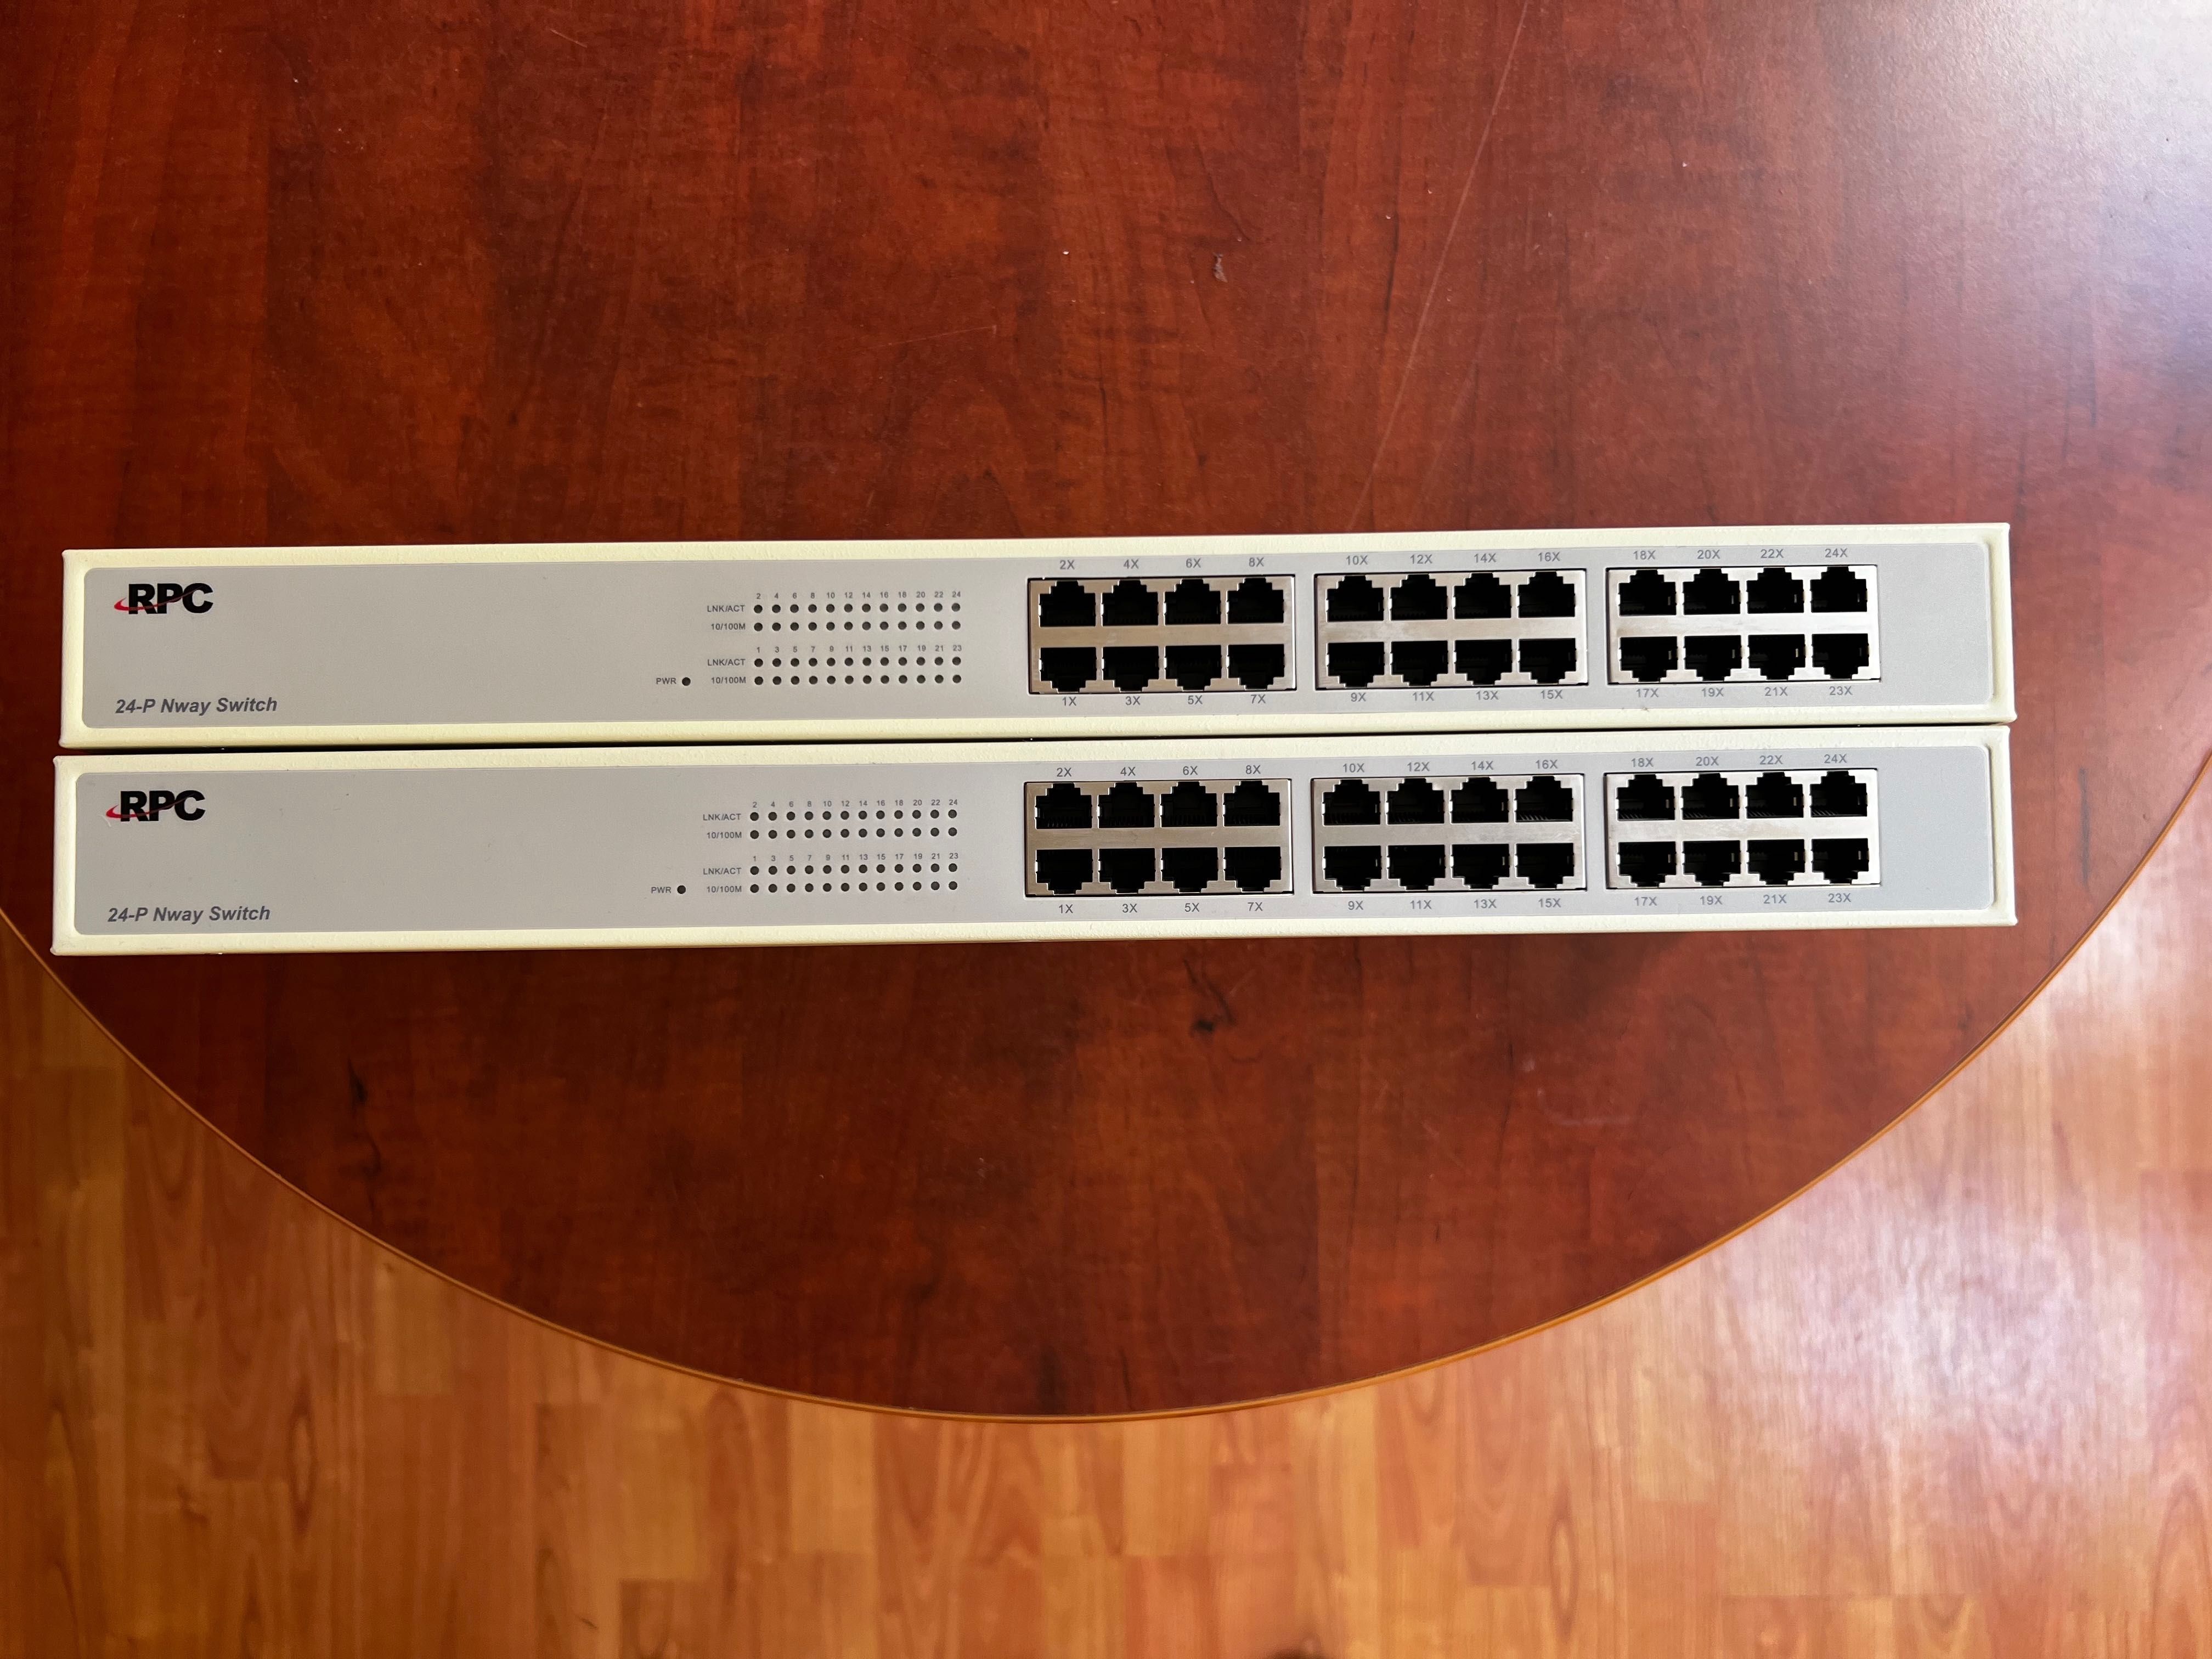 2 buc Switch RPC SW24P, 24-Port 10/100MBps N-Way